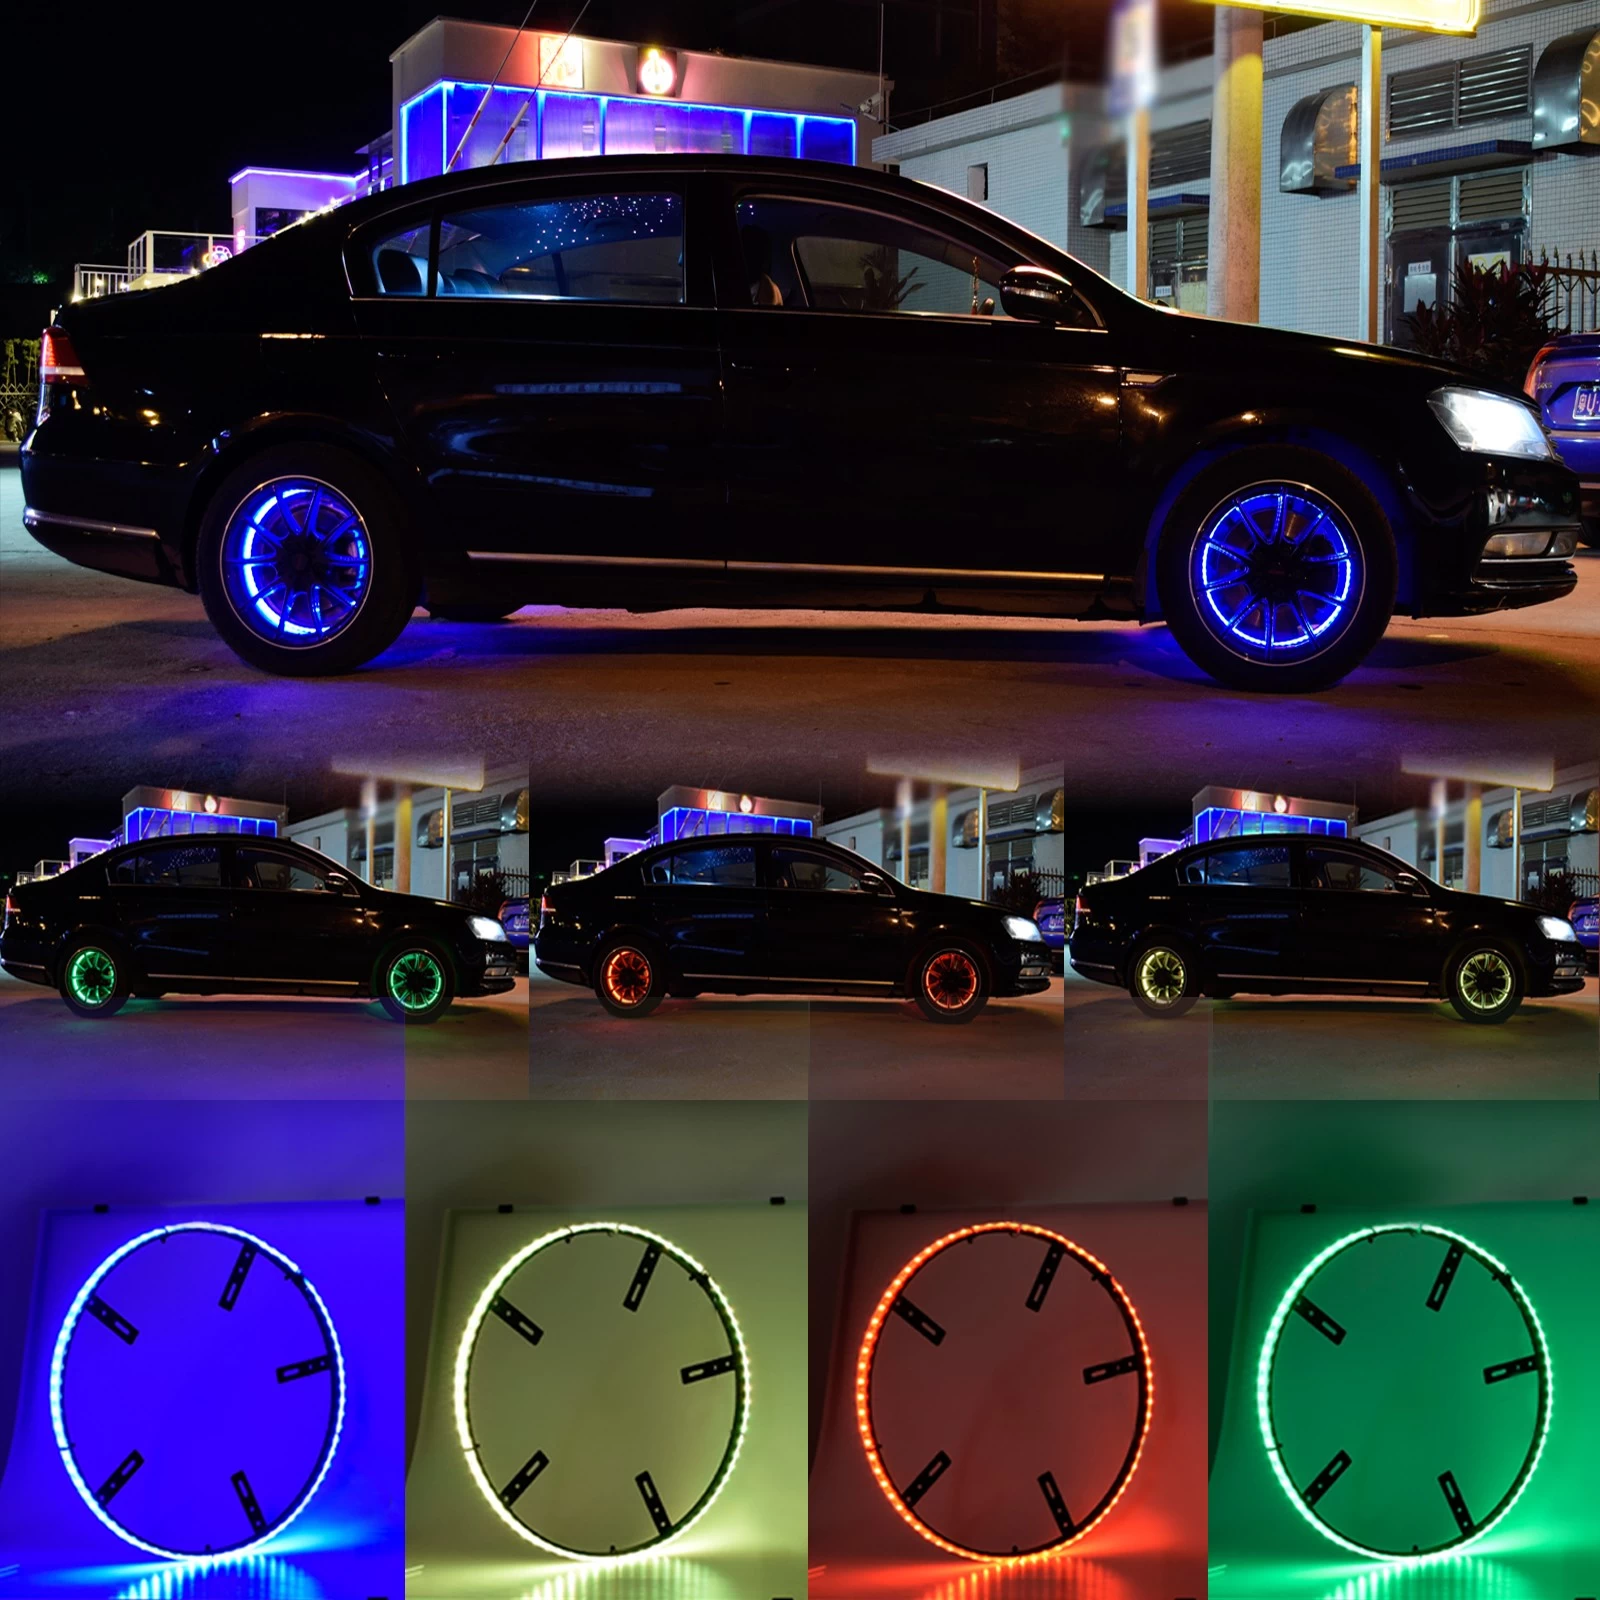 China Unionlux 14.5" 15.5inch LED Wheel Ring Light Kit RGB LED Wheel Ring Light Kit Tire Lights Turn Signal And Braking Function Can Controlled By Bluetooth Multi Mode Color Waterproof fabricante